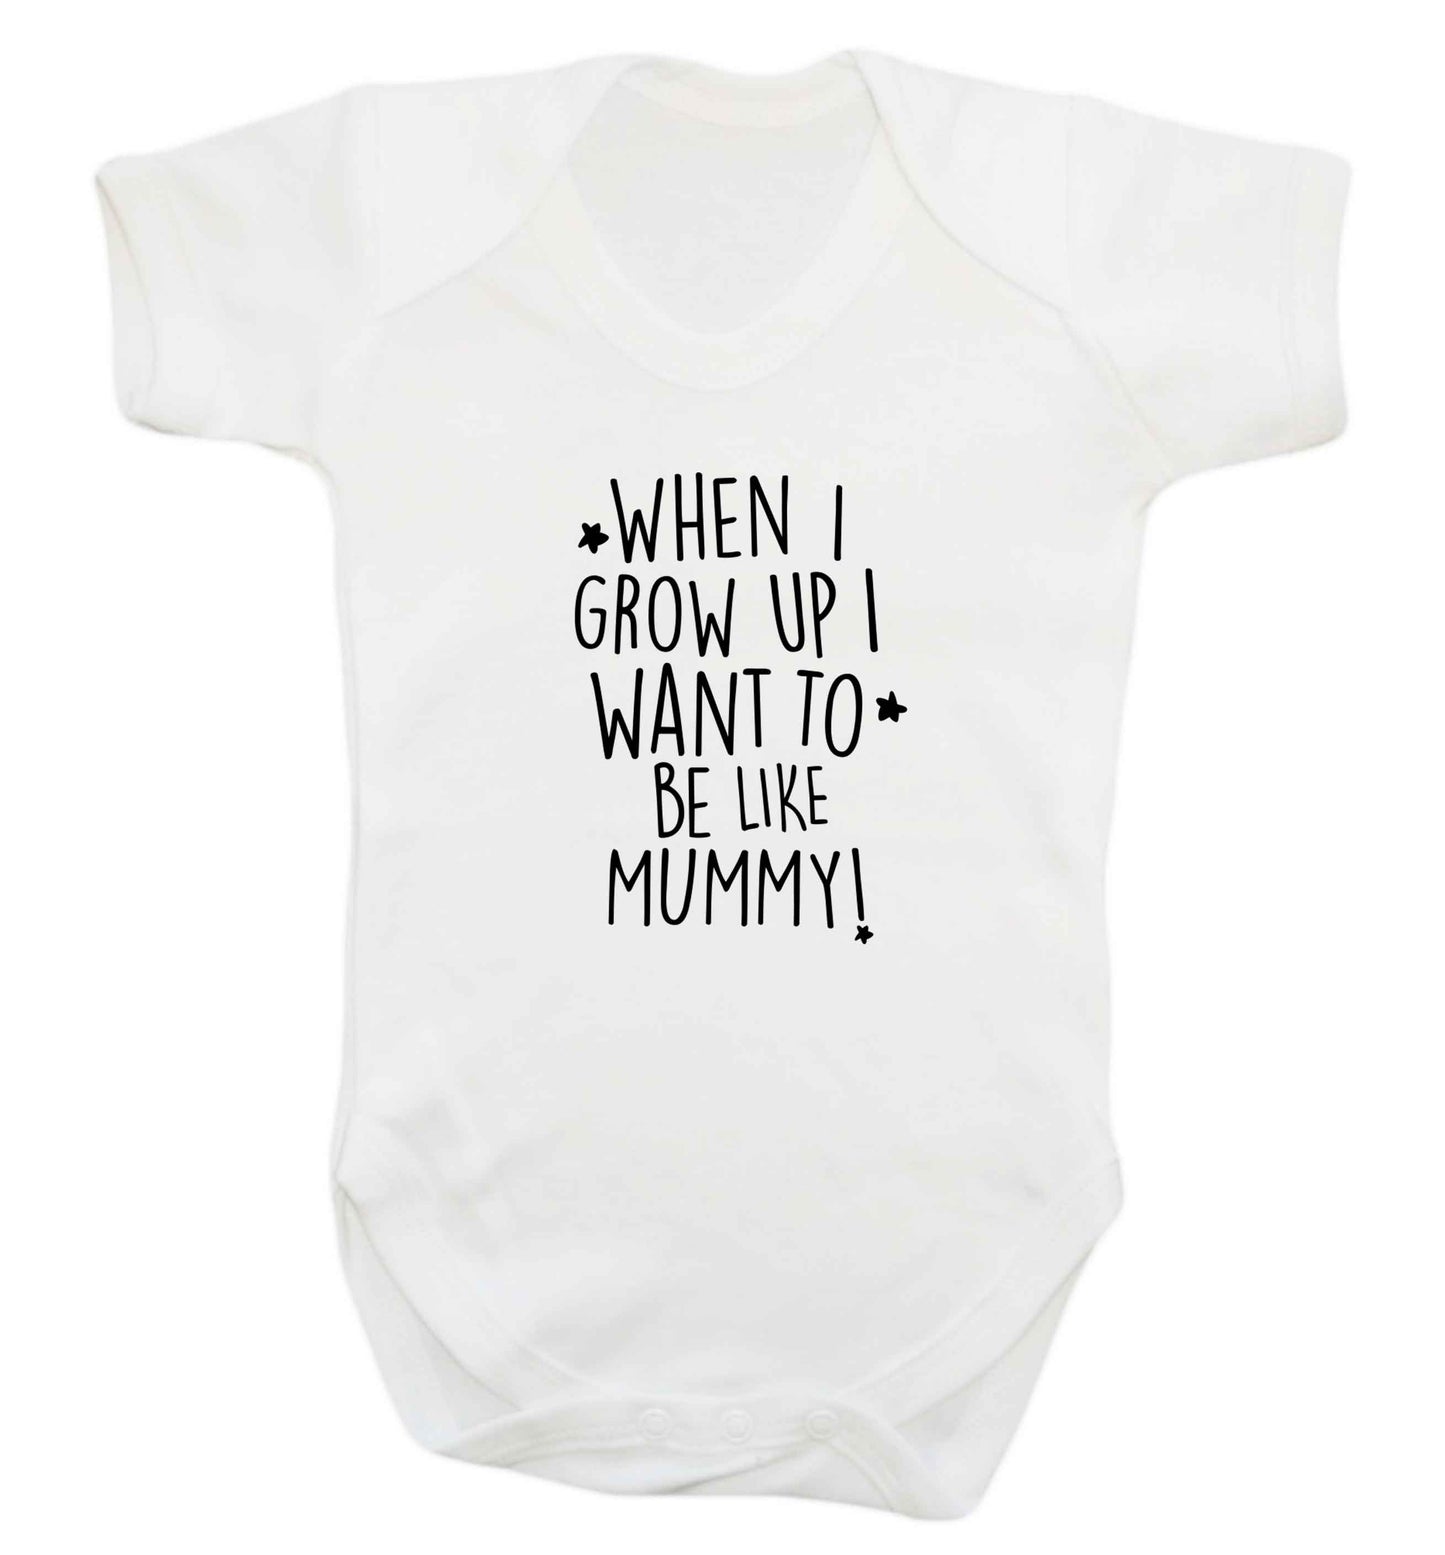 When I grow up I want to be like my mummy baby vest white 18-24 months